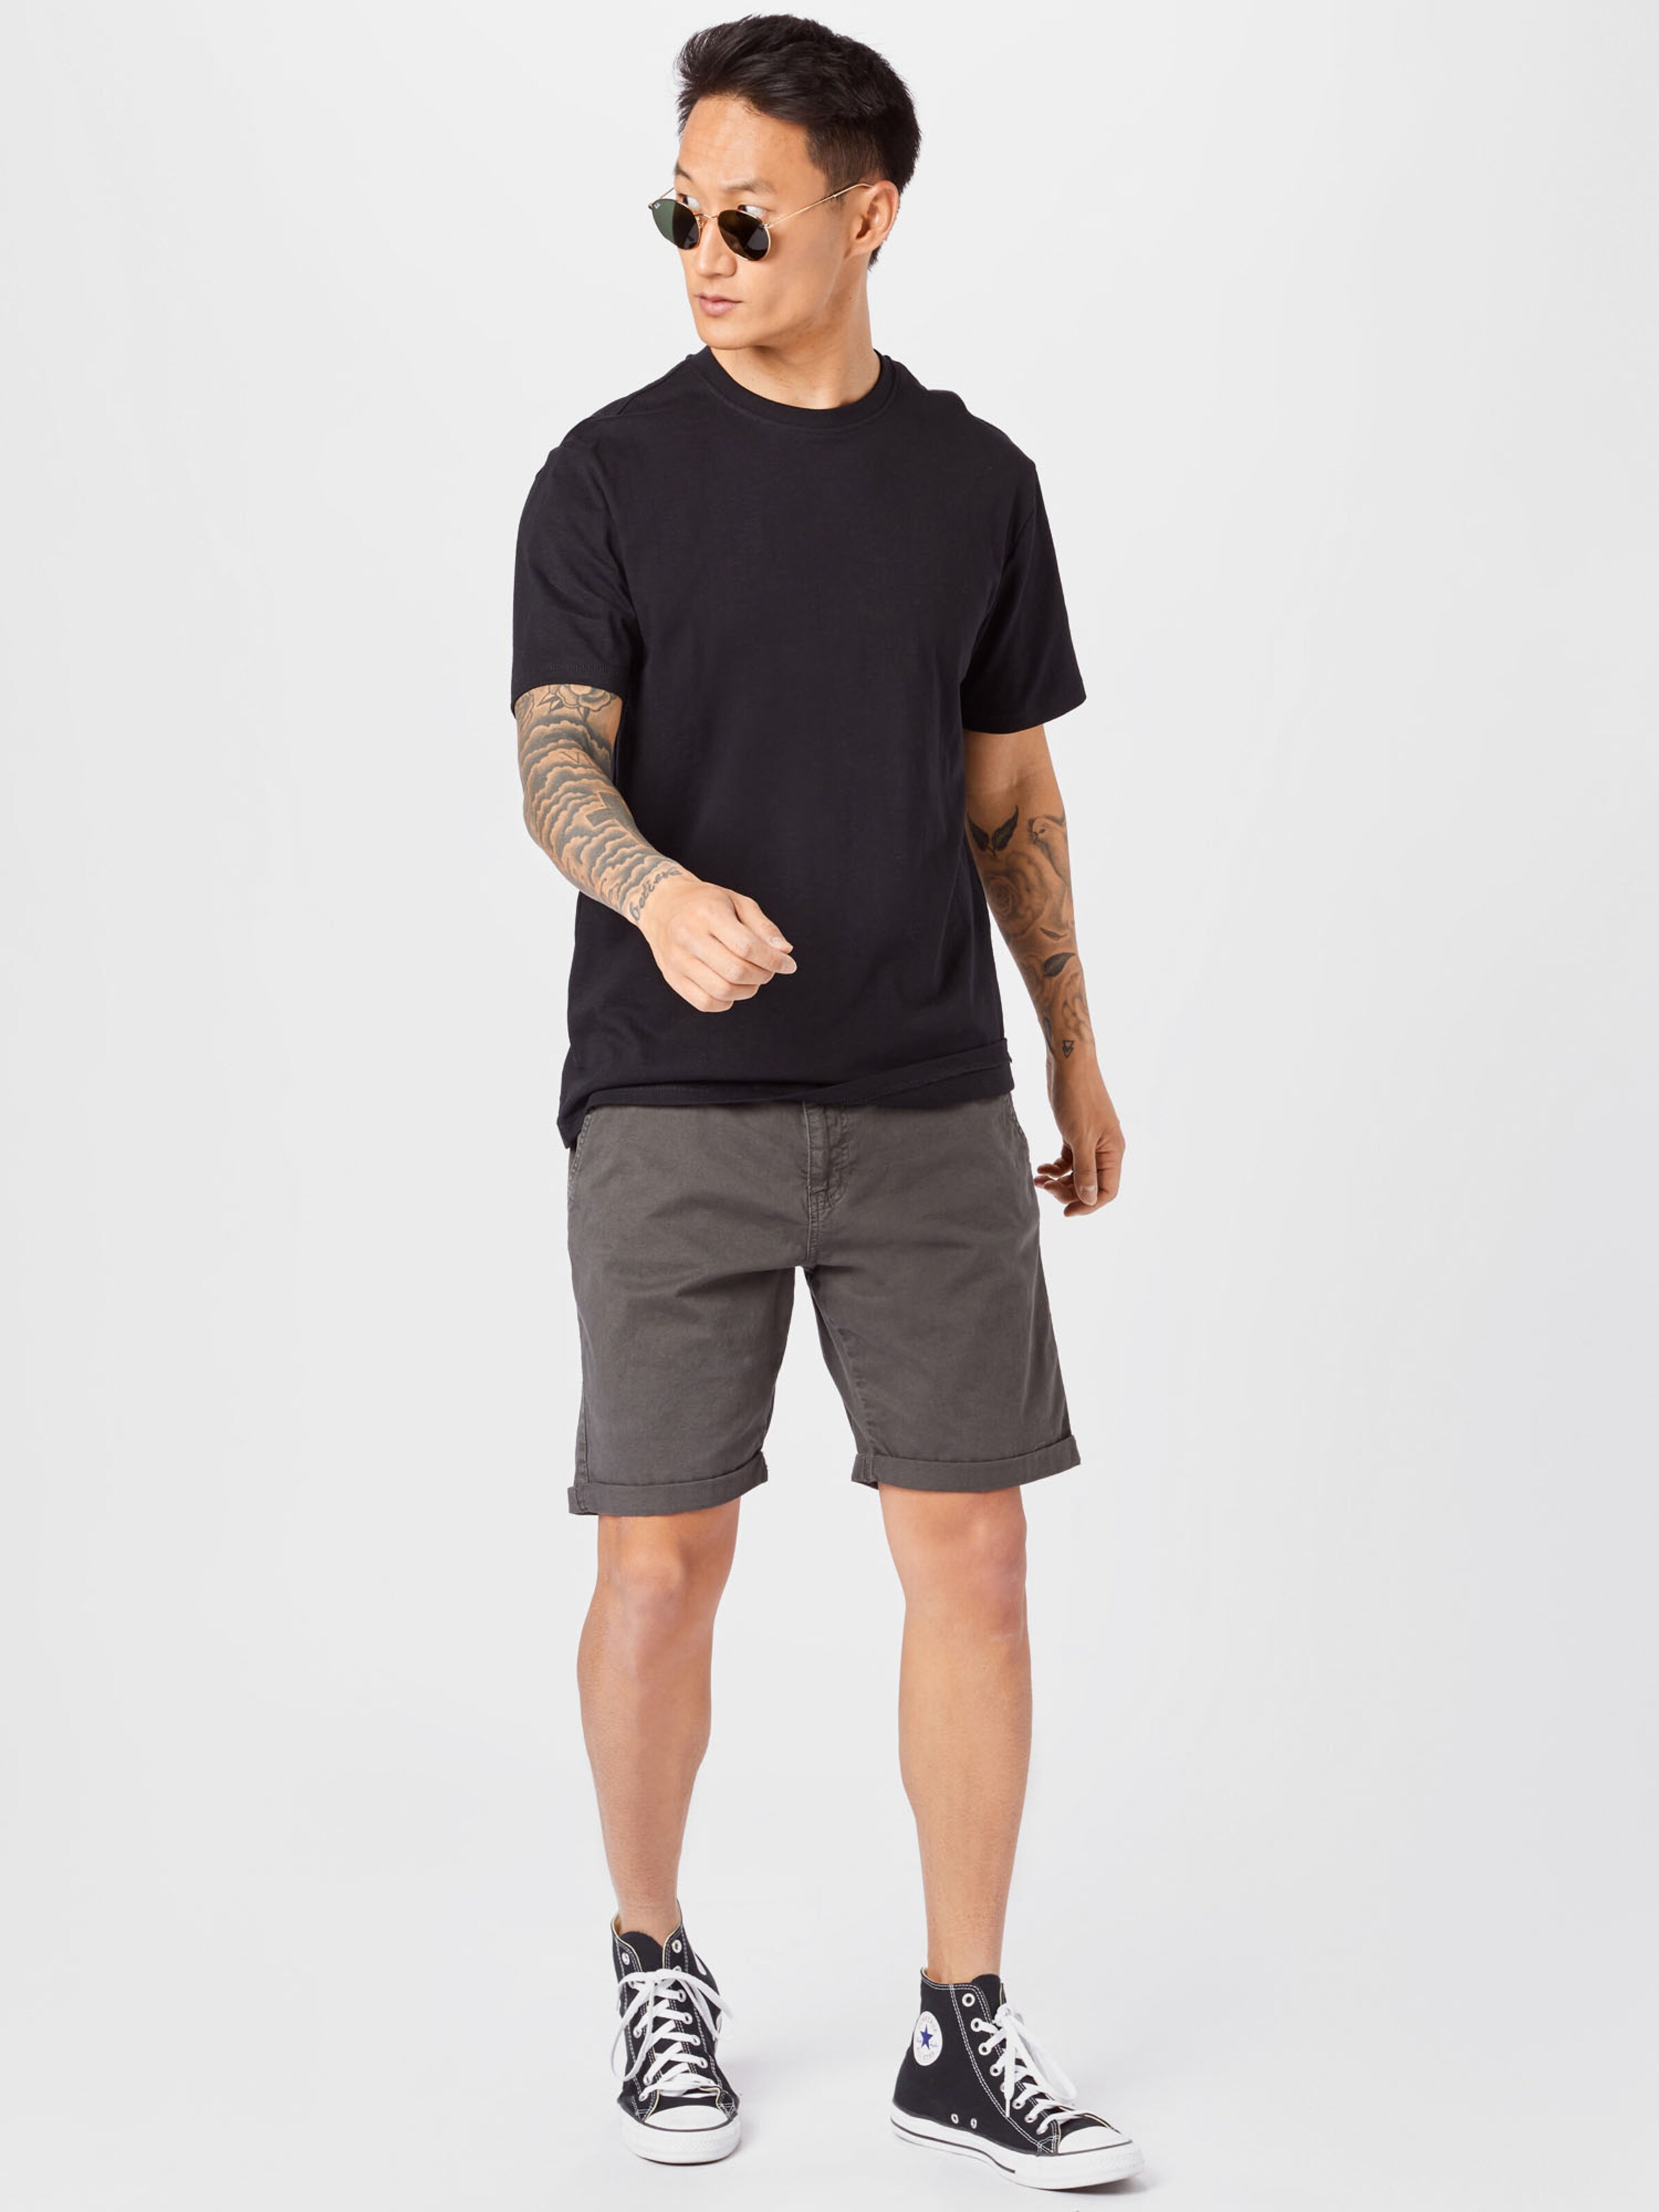 Men T-shirts | Only & Sons Shirt in Black - ZH62014